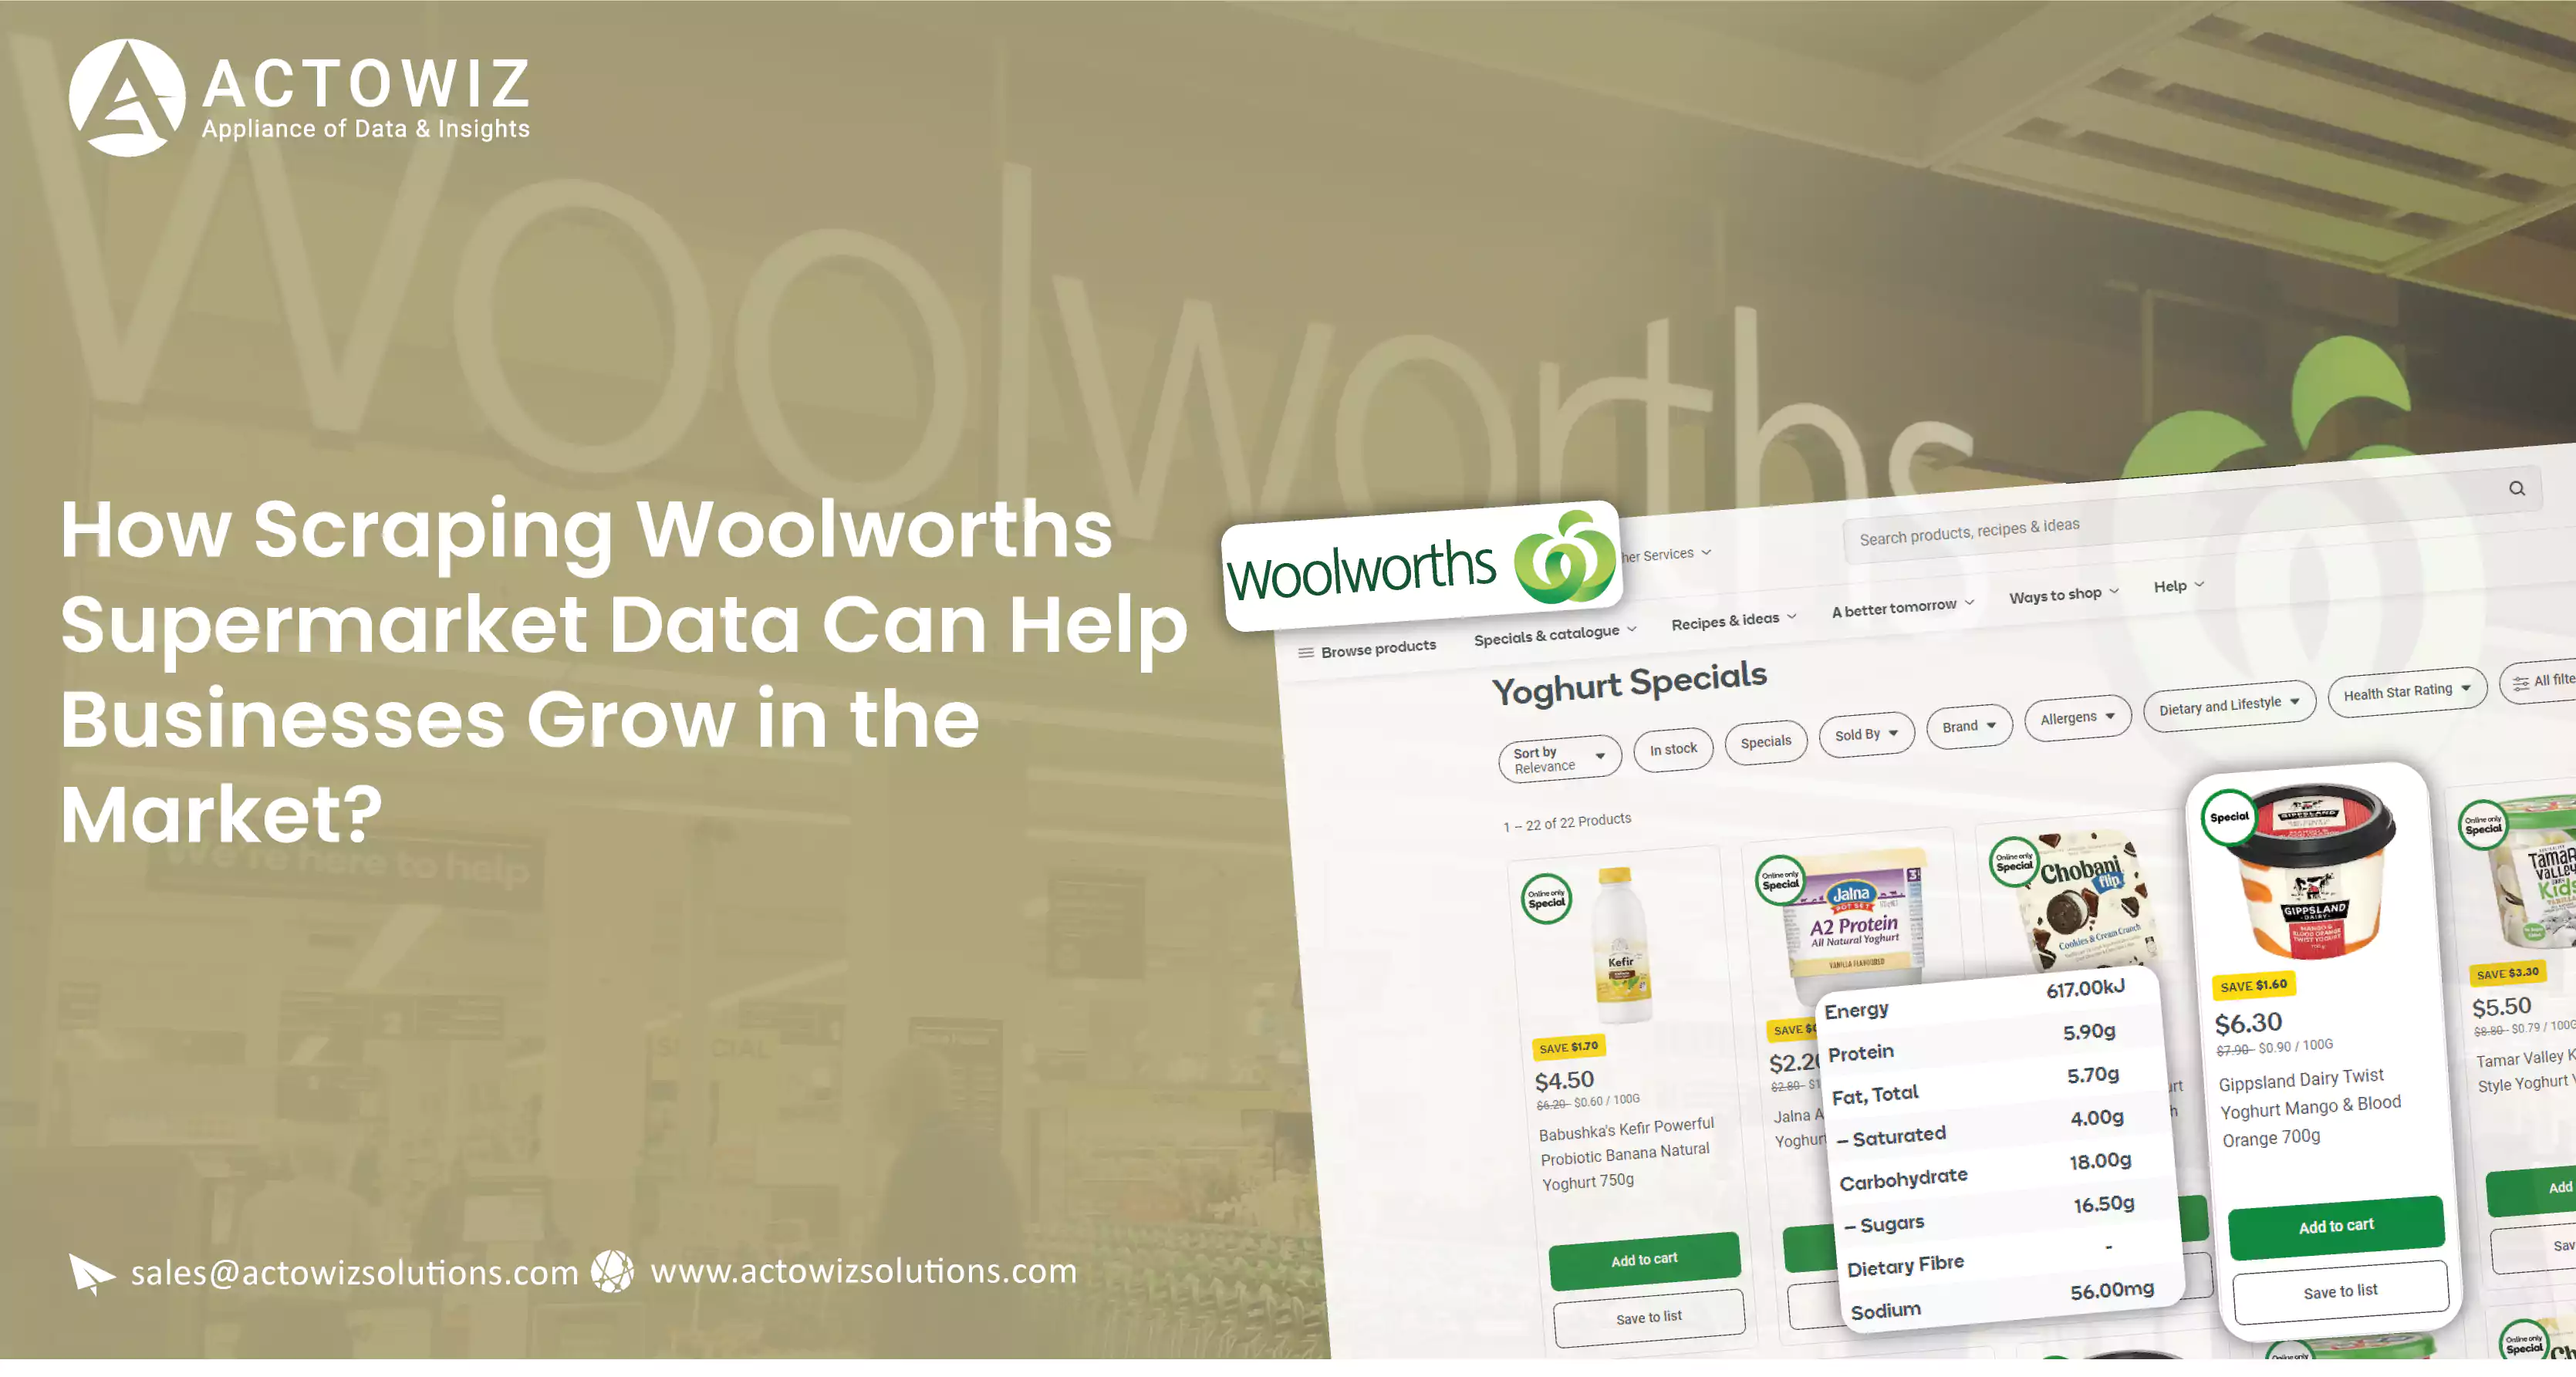 How Scraping Woolworths Supermarket Data Can Help Businesses Grow in the Market